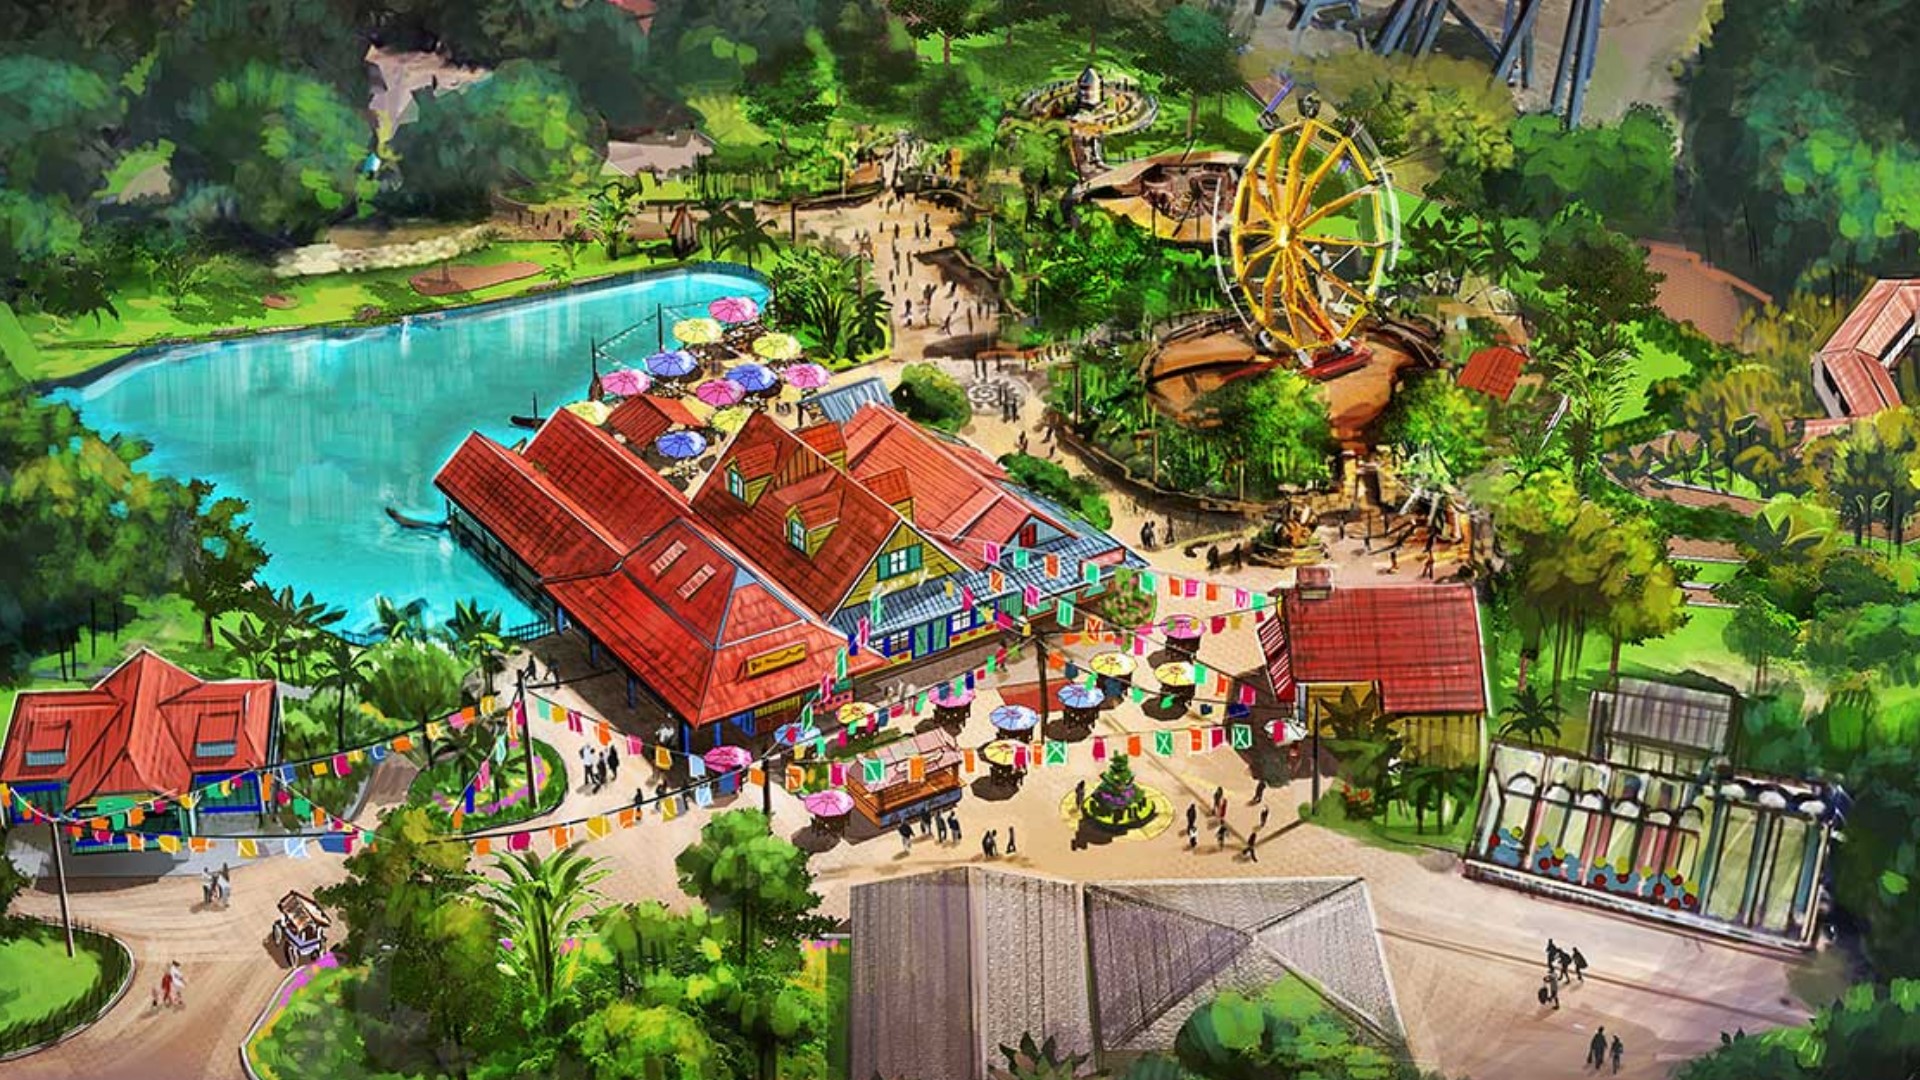 The 364-acre amusement park and water park near Cincinnati will be adding two new rides, "Cargo Loco" and "Sol Spin," and two restaurants.